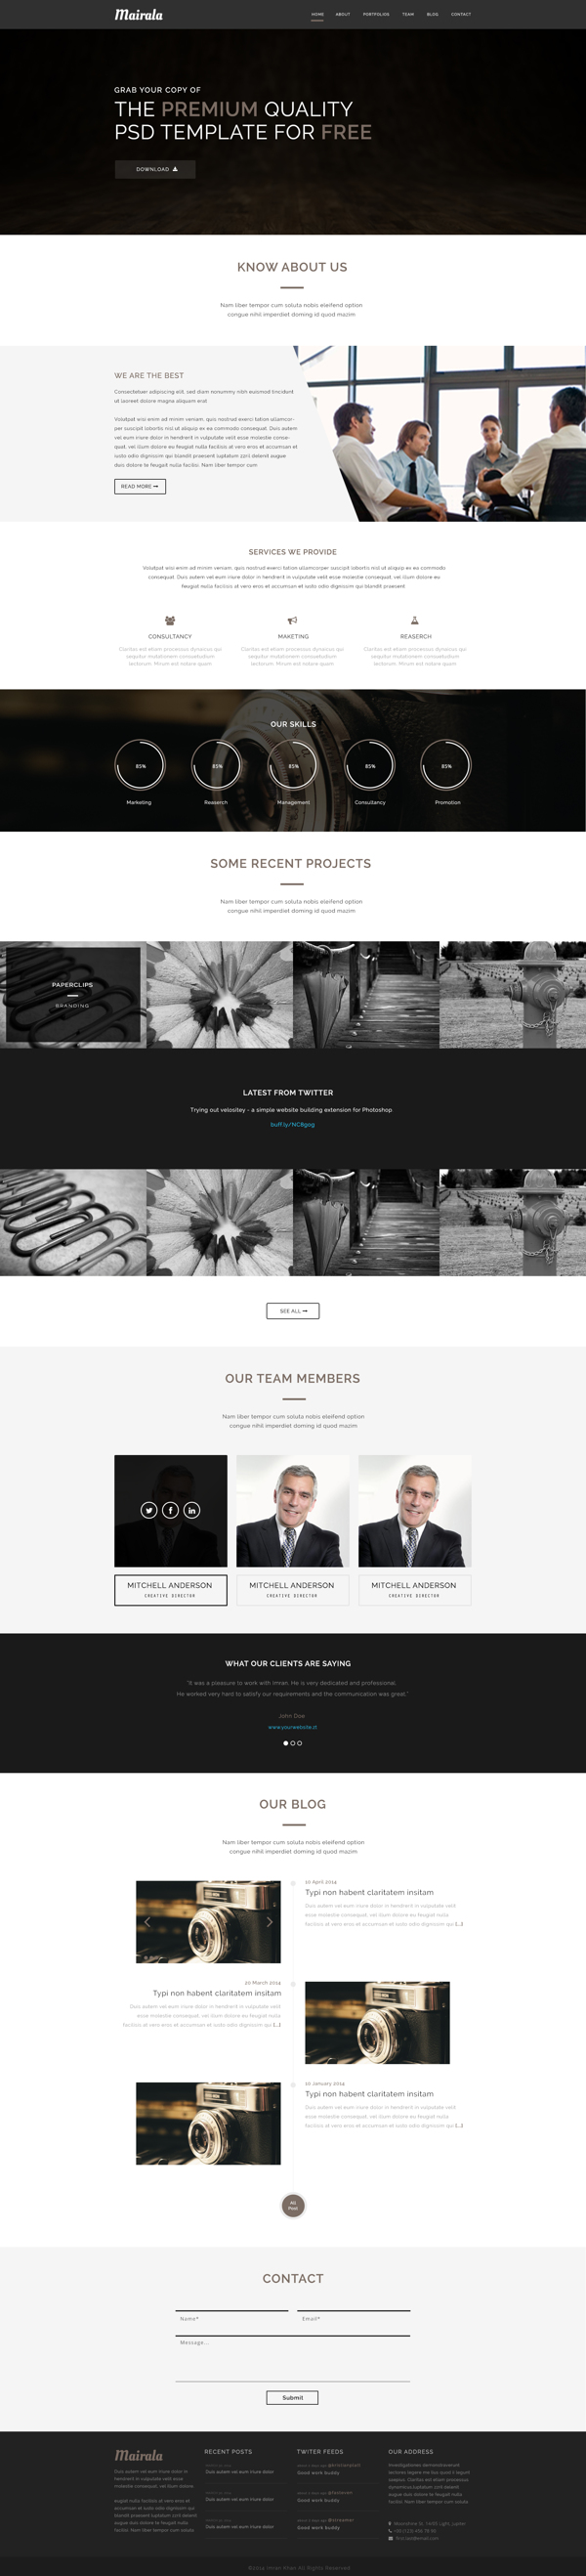 MAIRALA - Free One Page Corporate Agency PSD Template